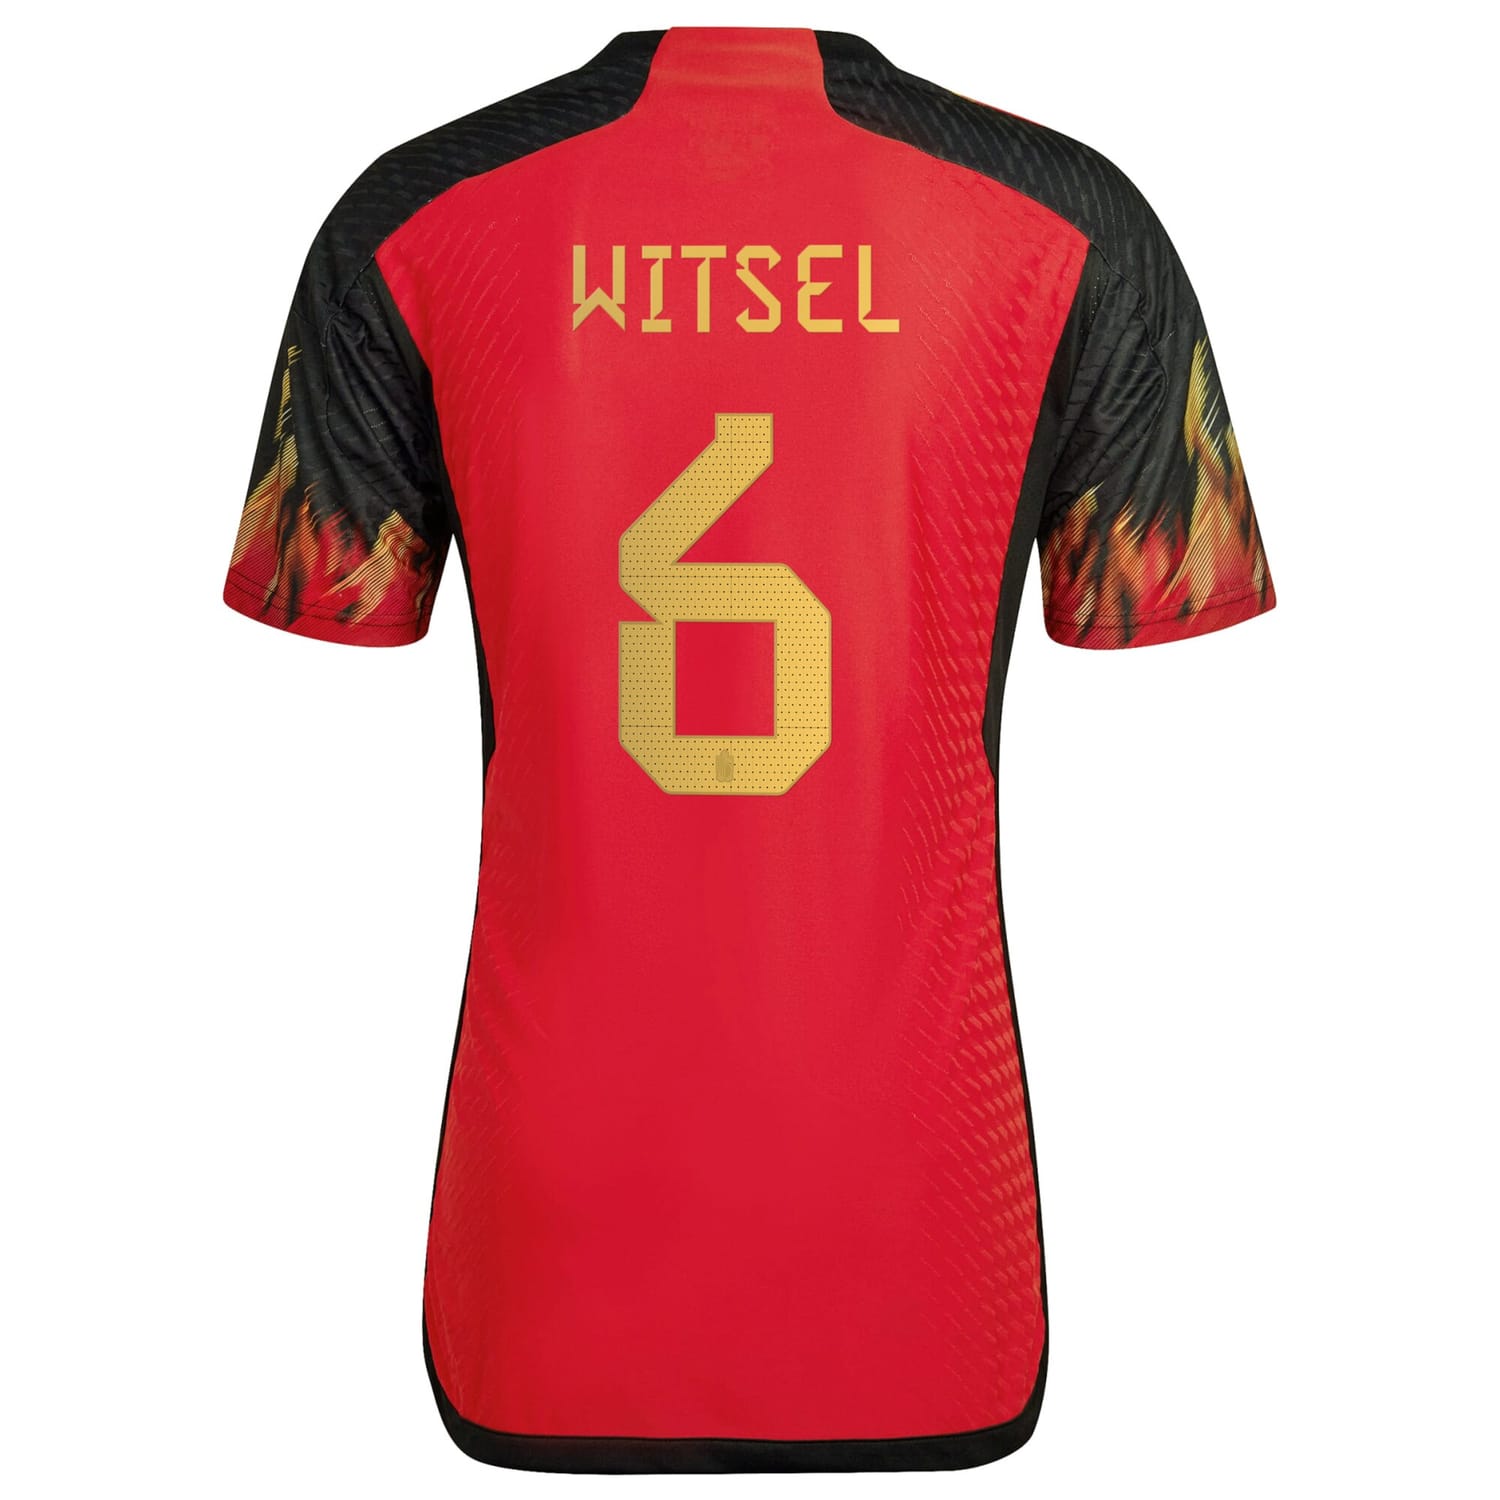 Belgium National Team Home Authentic Jersey Shirt 2022 player Axel Witsel 6 printing for Men